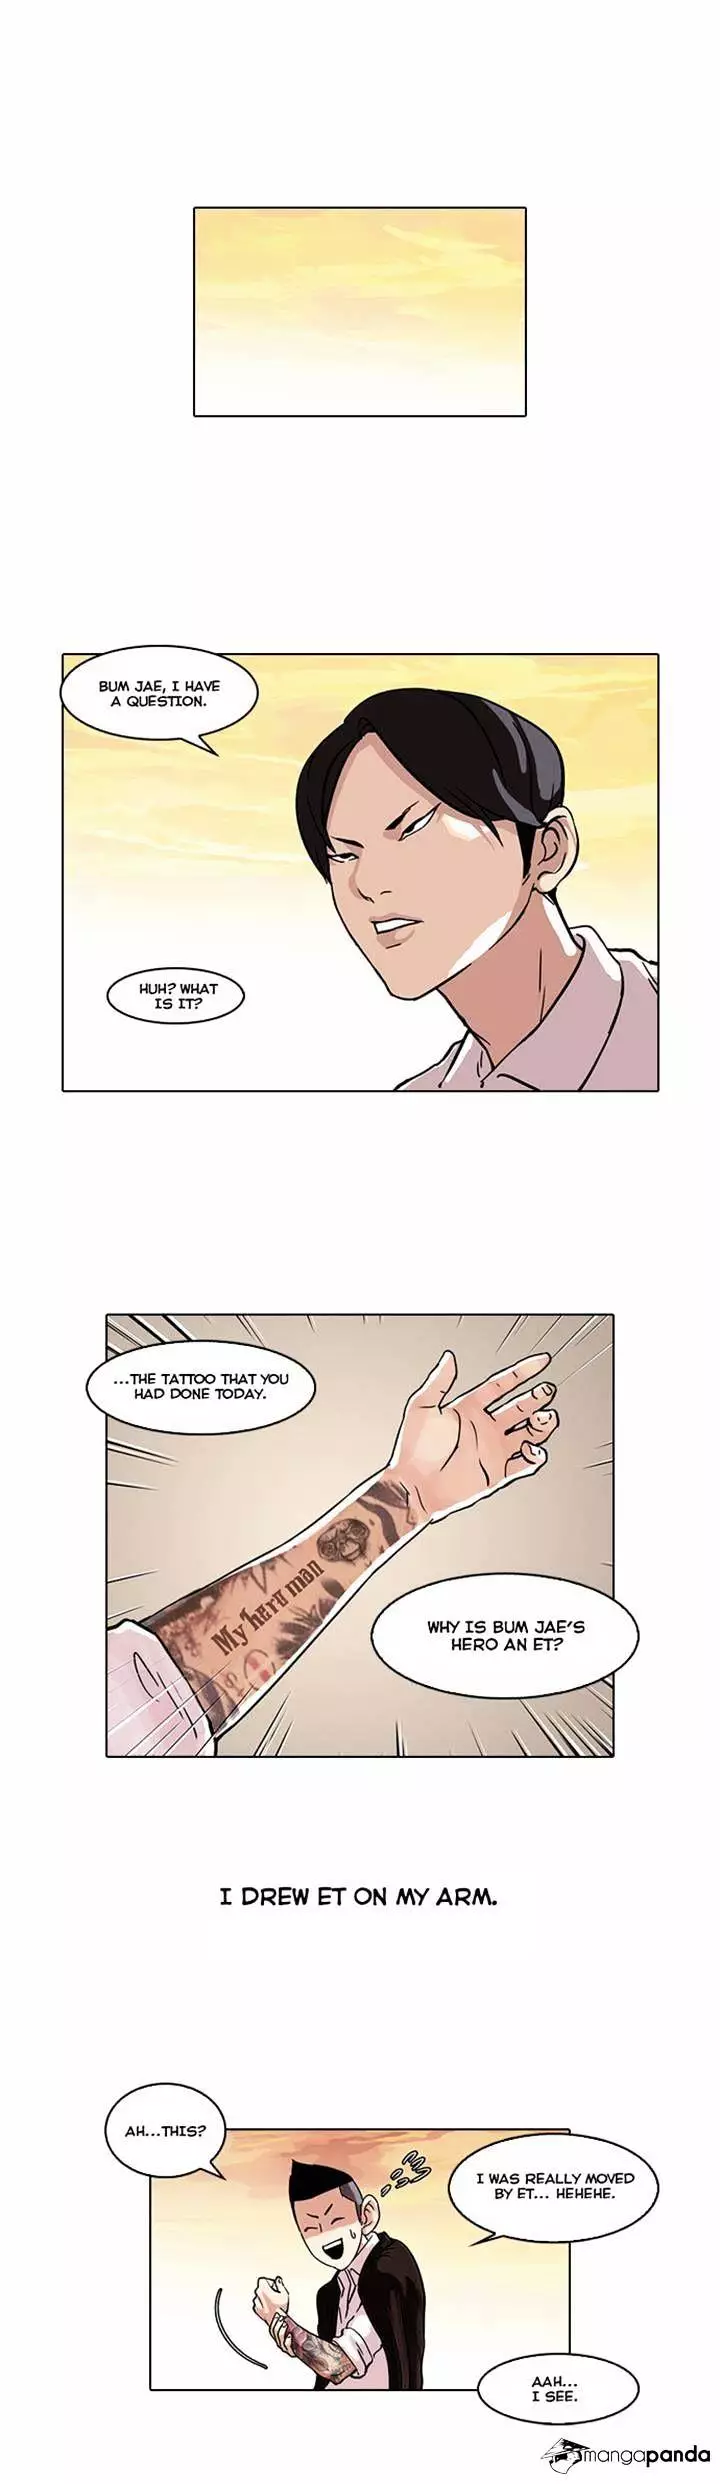 Lookism - 57.1 page 26-9e01f4d5